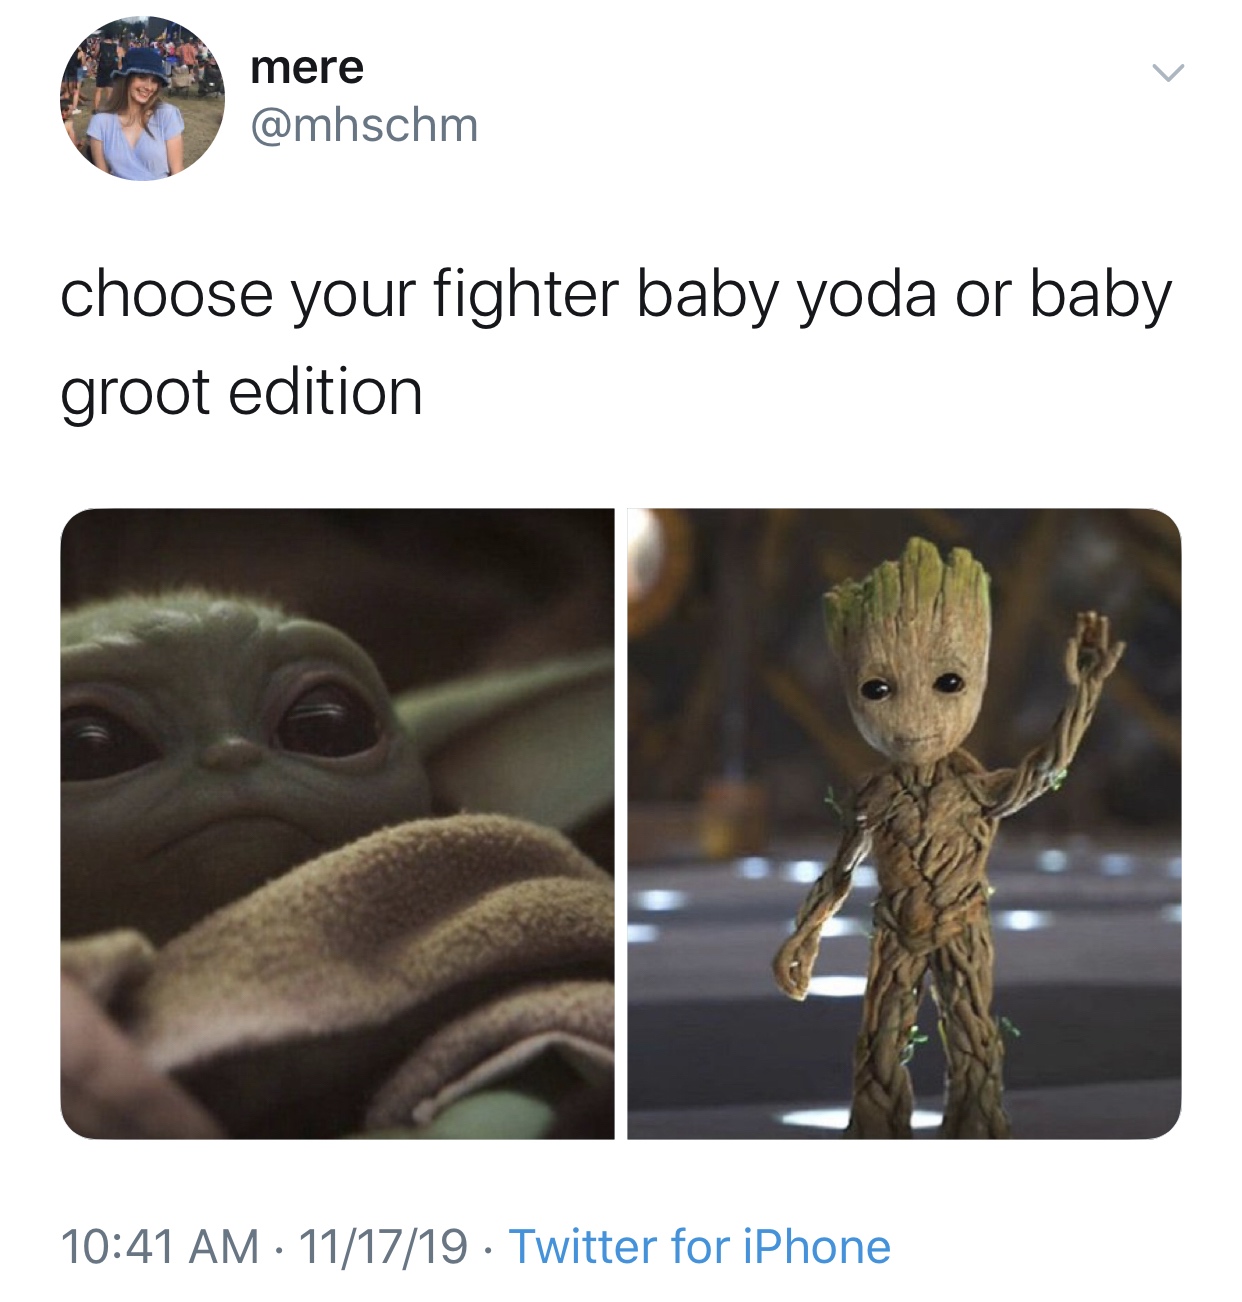 baby yoda meme - mere choose your fighter baby yoda or baby groot edition 111719 Twitter for iPhone